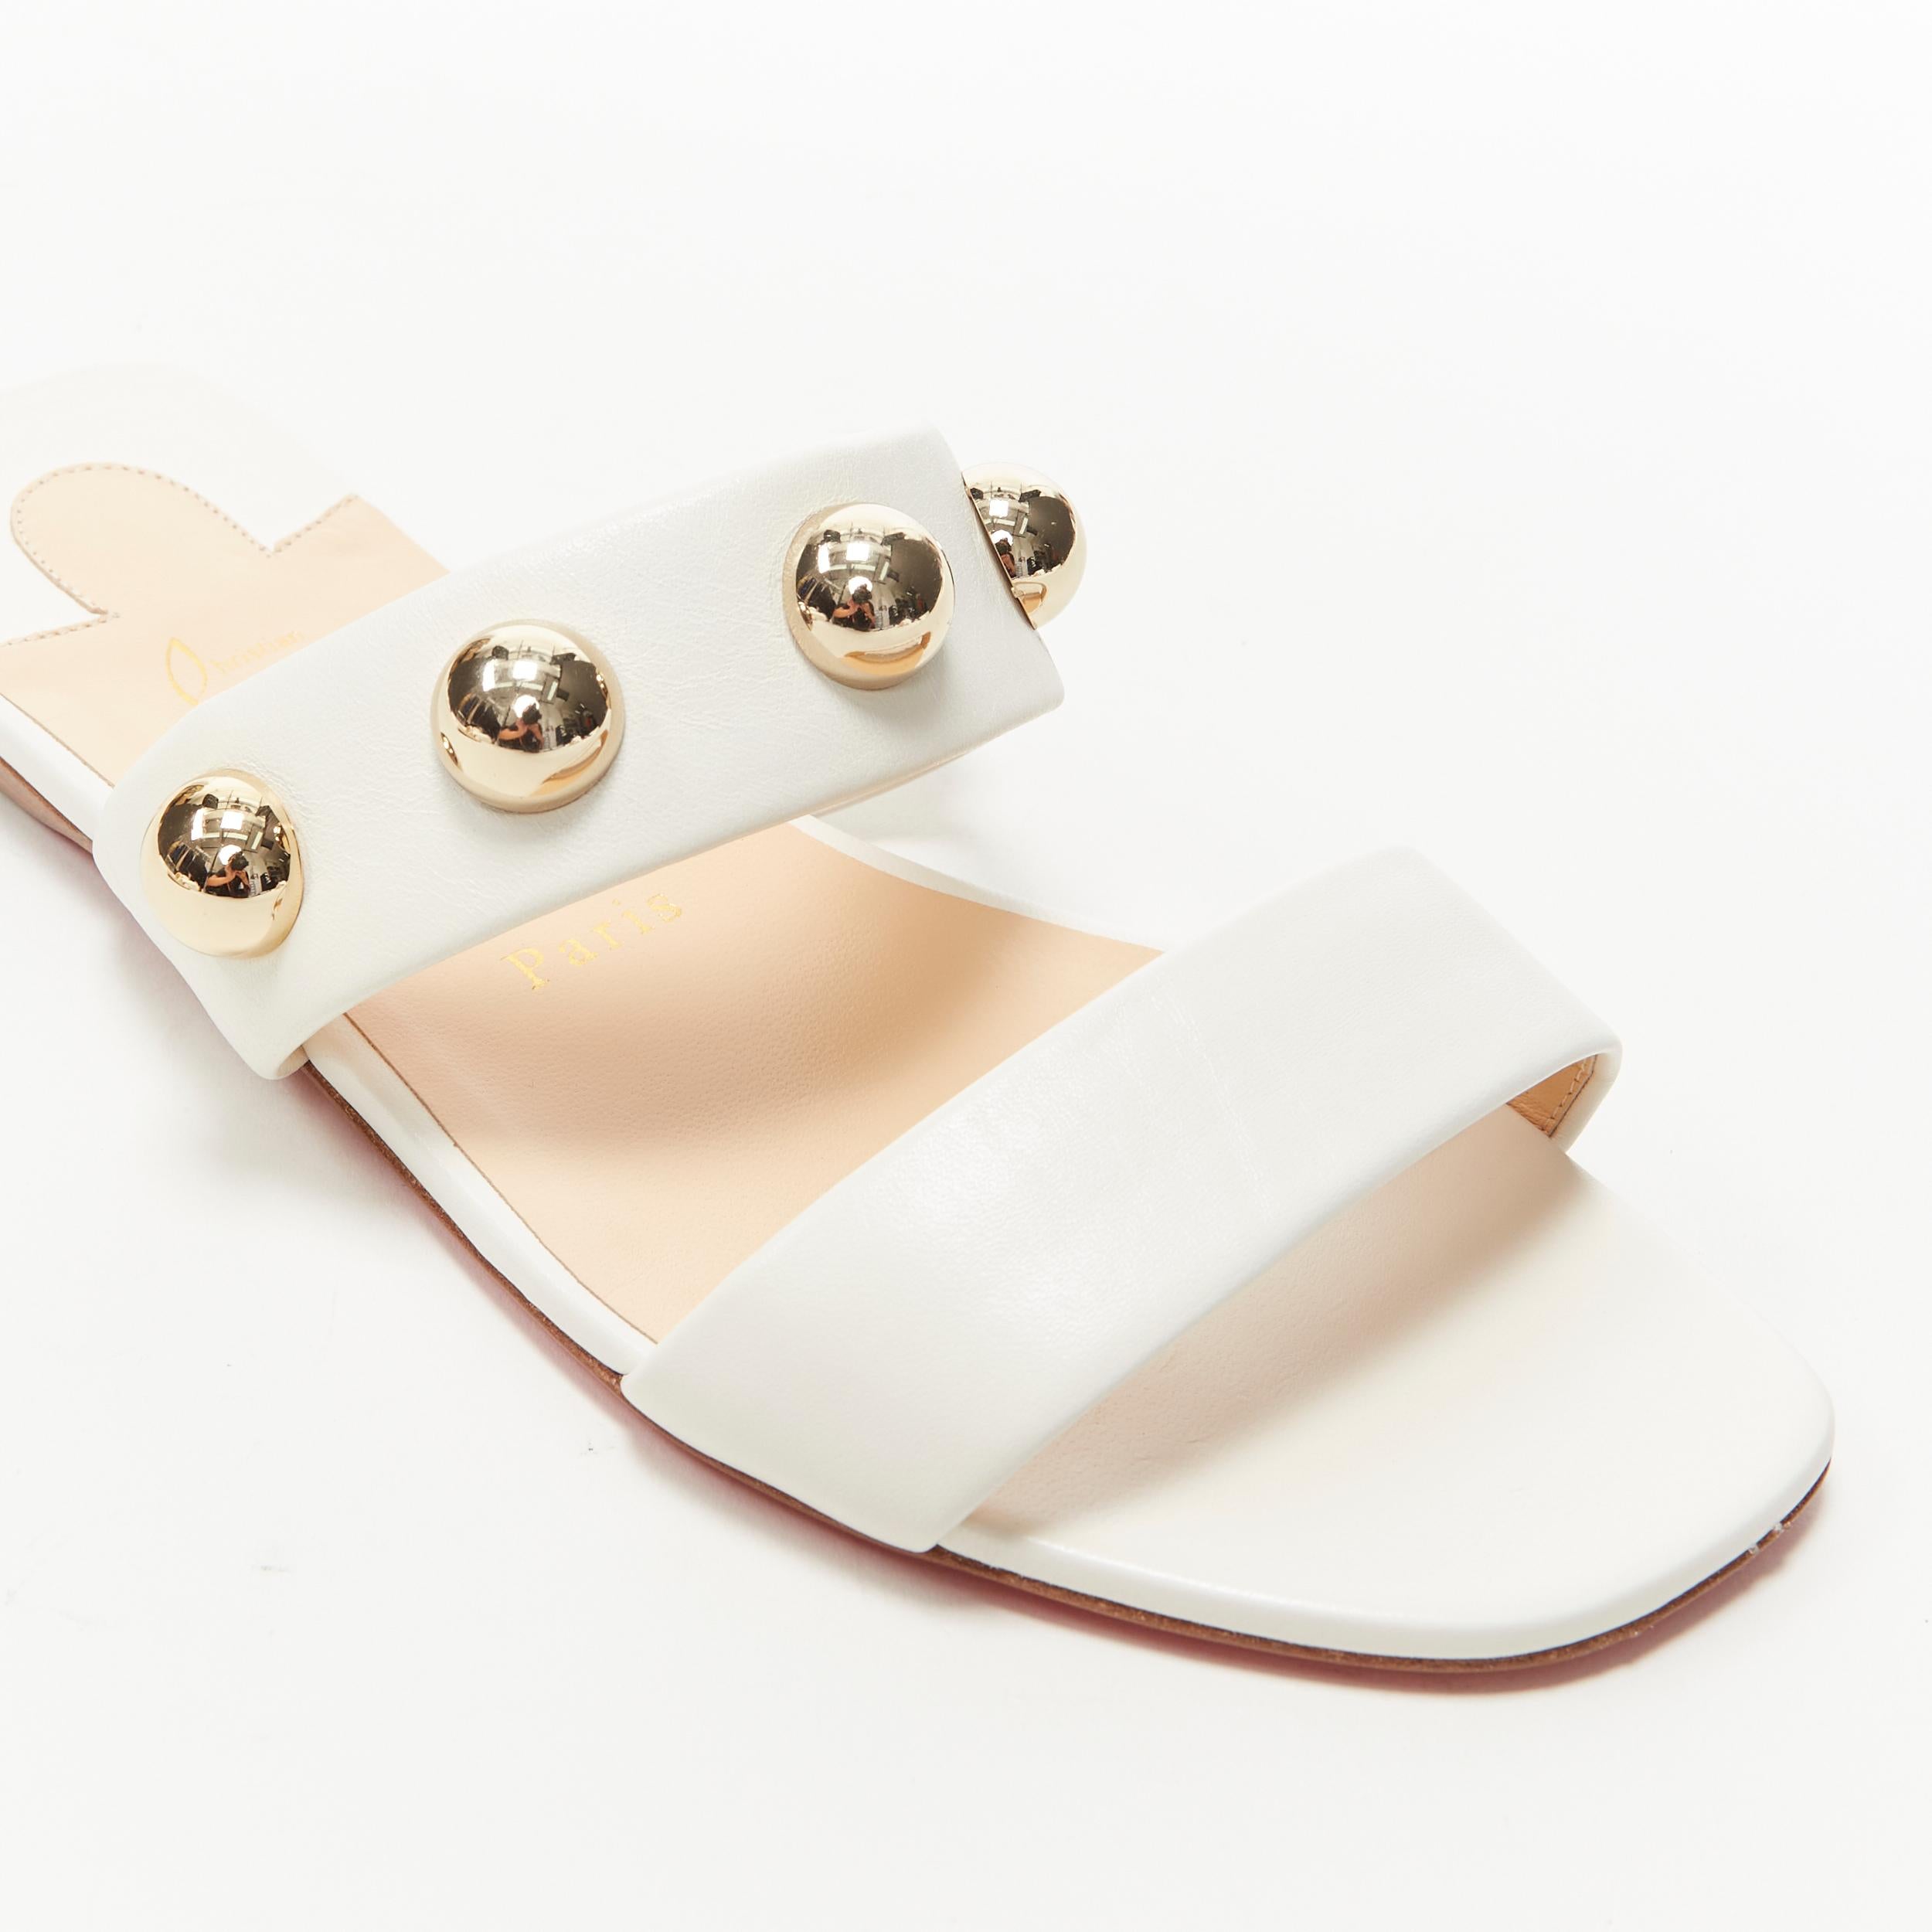 new CHRISTIAN LOUBOUTIN gold dome sphere stud white leather flat sandals EU37.5 3